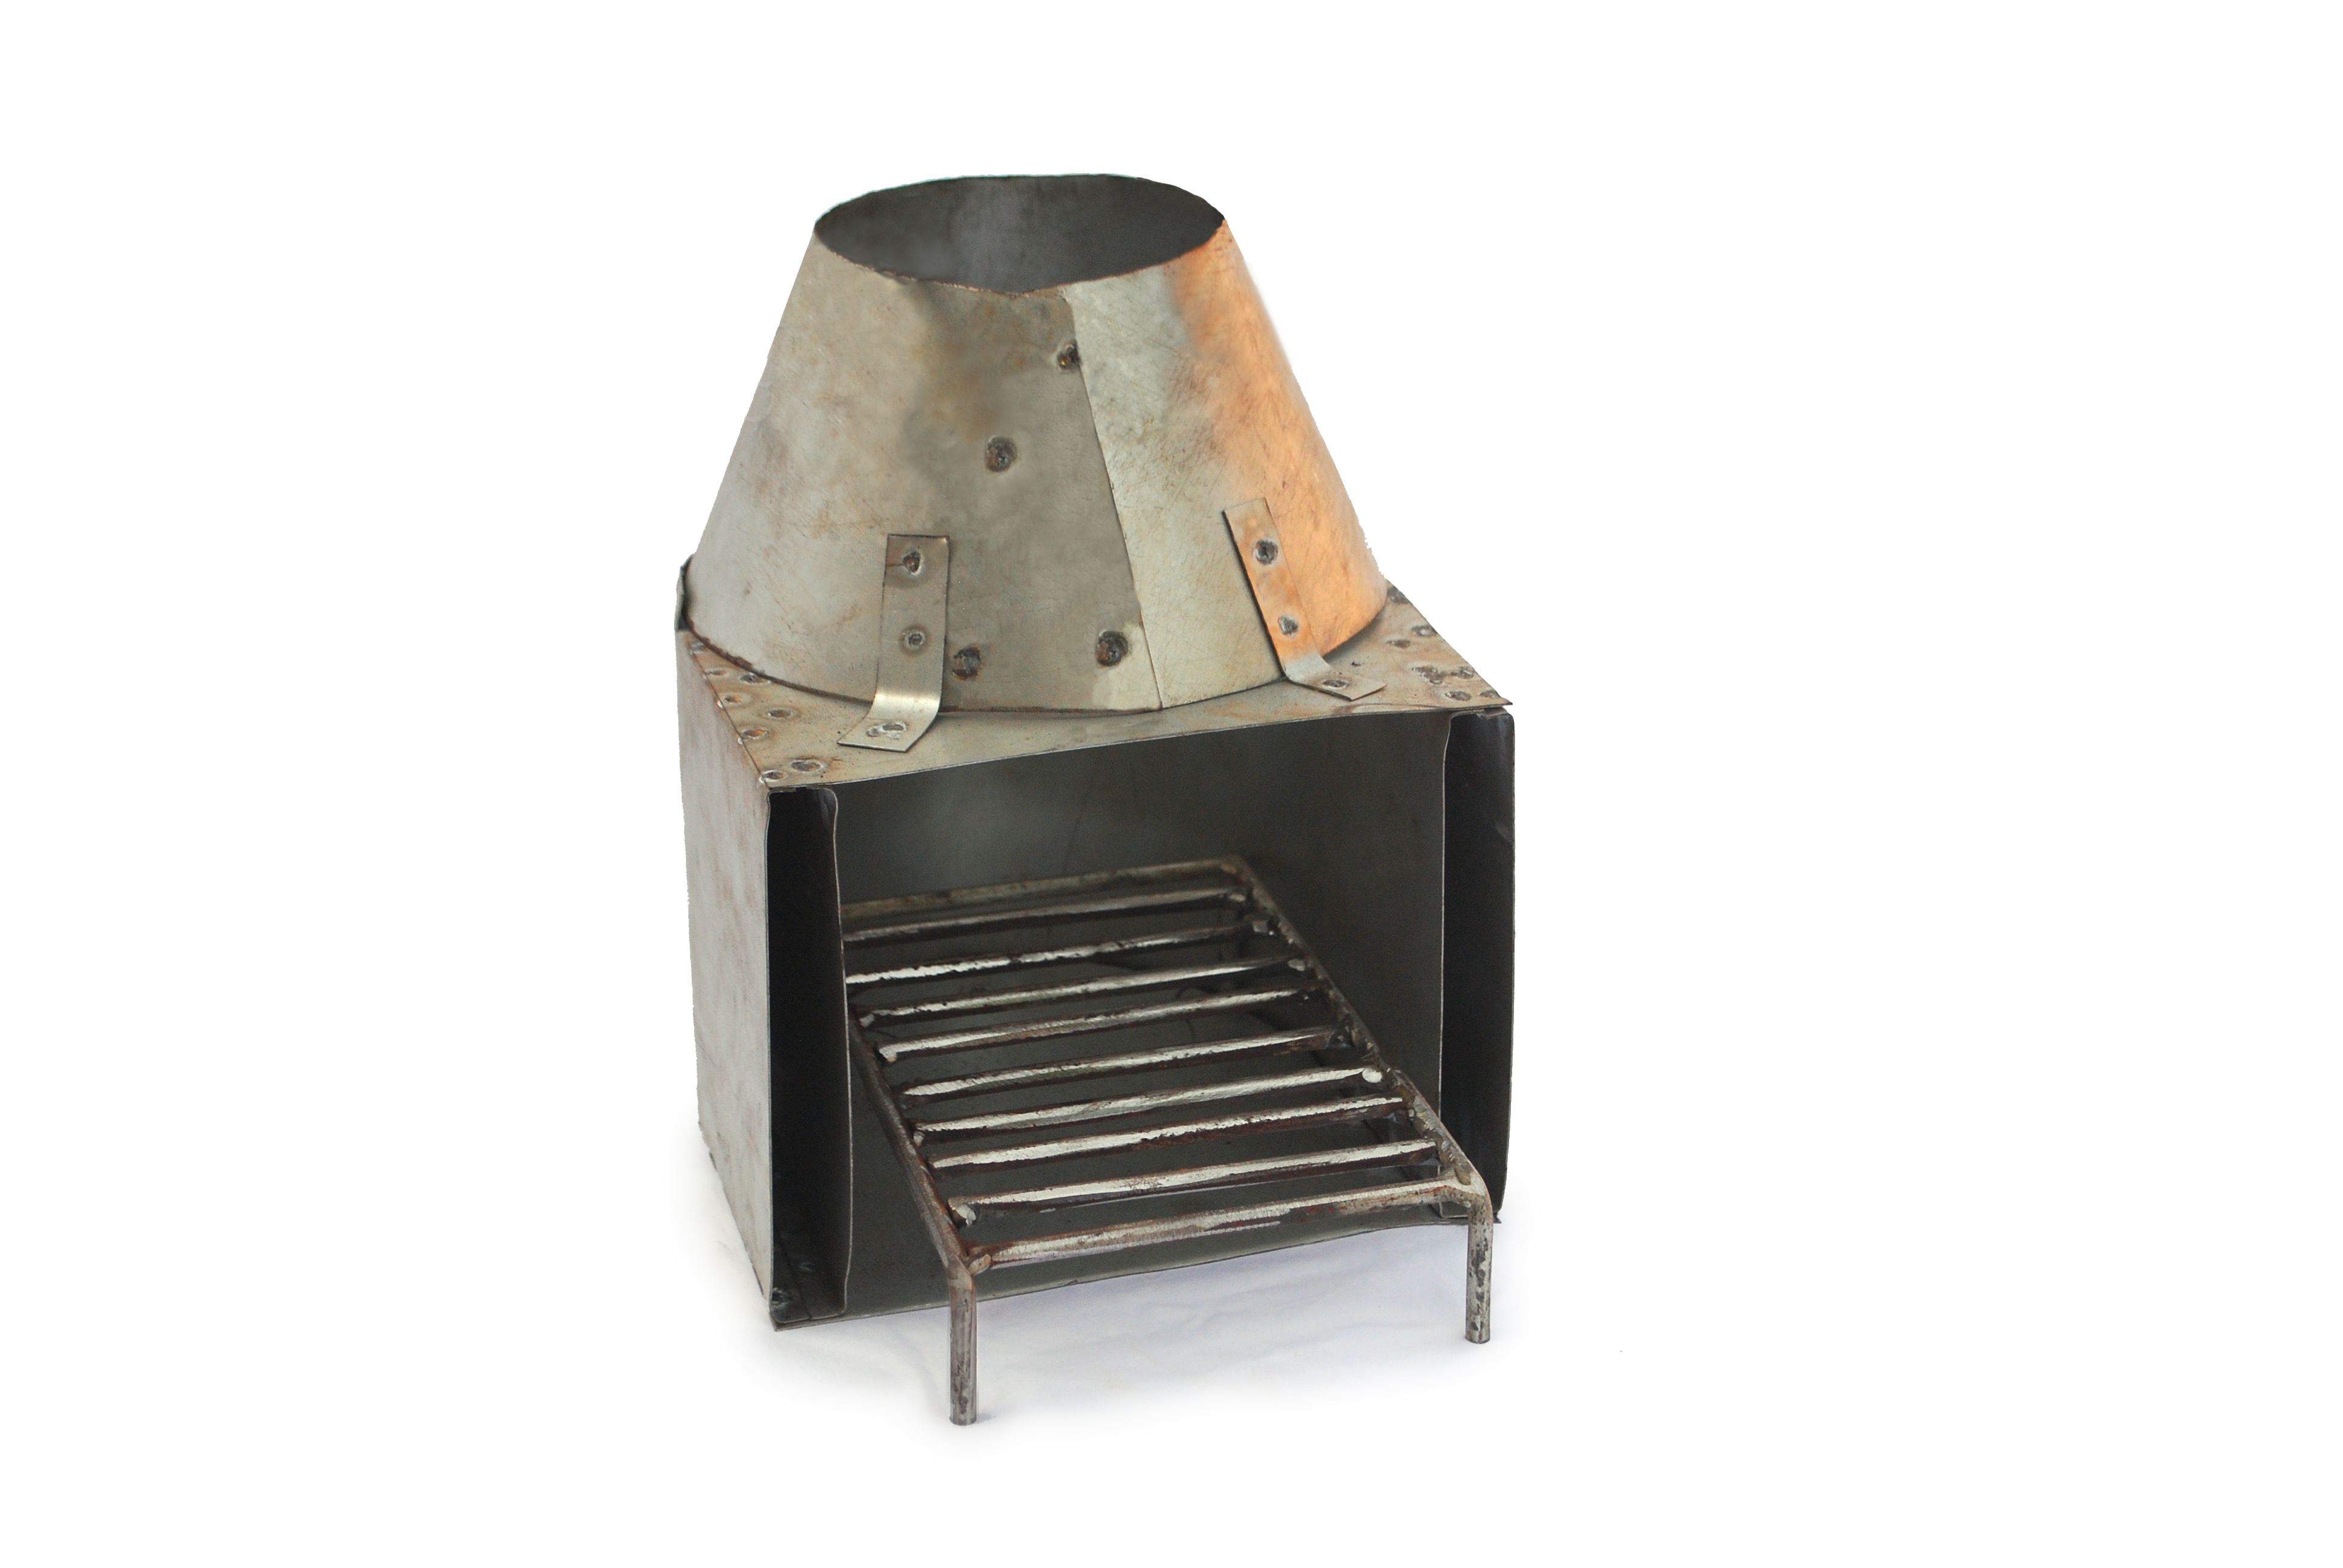 By stripping off the outer body of the stove, we were able to reduce the cost of the stove significantly. Pictured above is an early prototype of this stove.